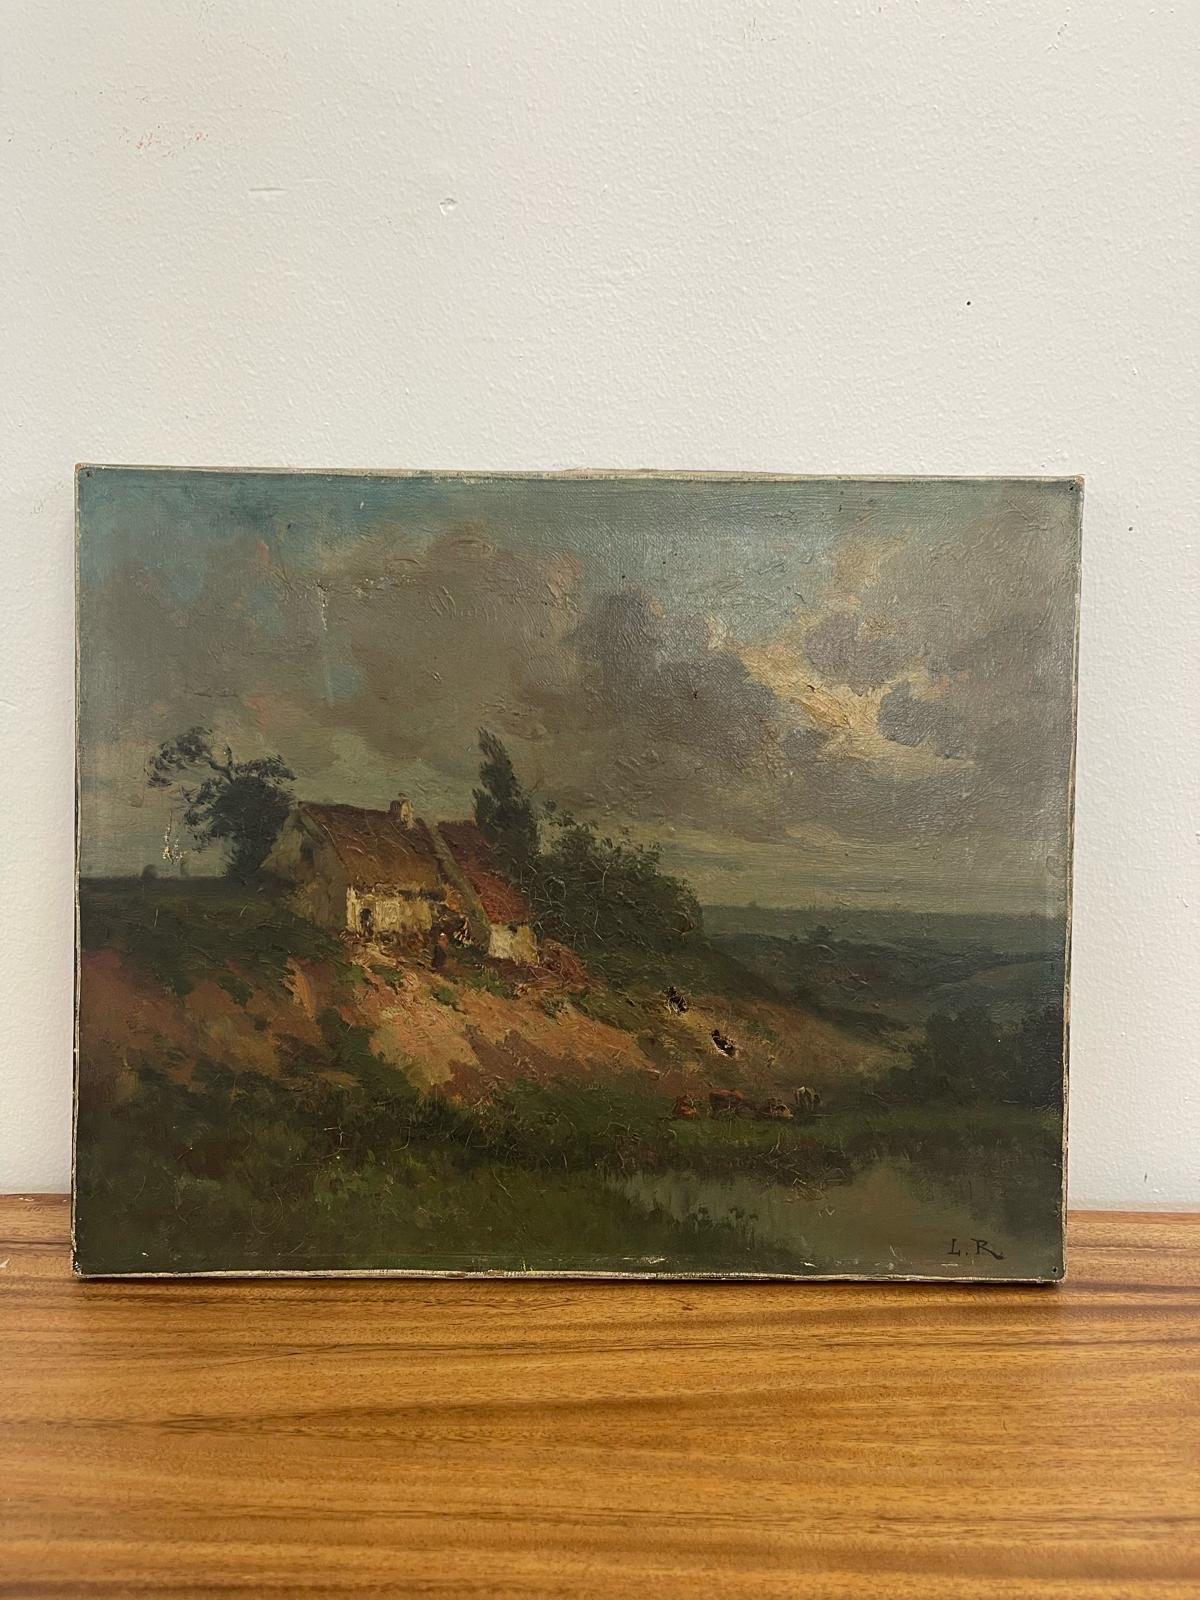 Sourced From Parisian Market. Patina and Cracking due to Age. The Artwork is Textured, Particularly in the Clouds. Signed in the Lower Corner. Vintage Condition Consistent with Age as Pictured.

Dimensions. 16 W ; 1/8 D ; 13 H